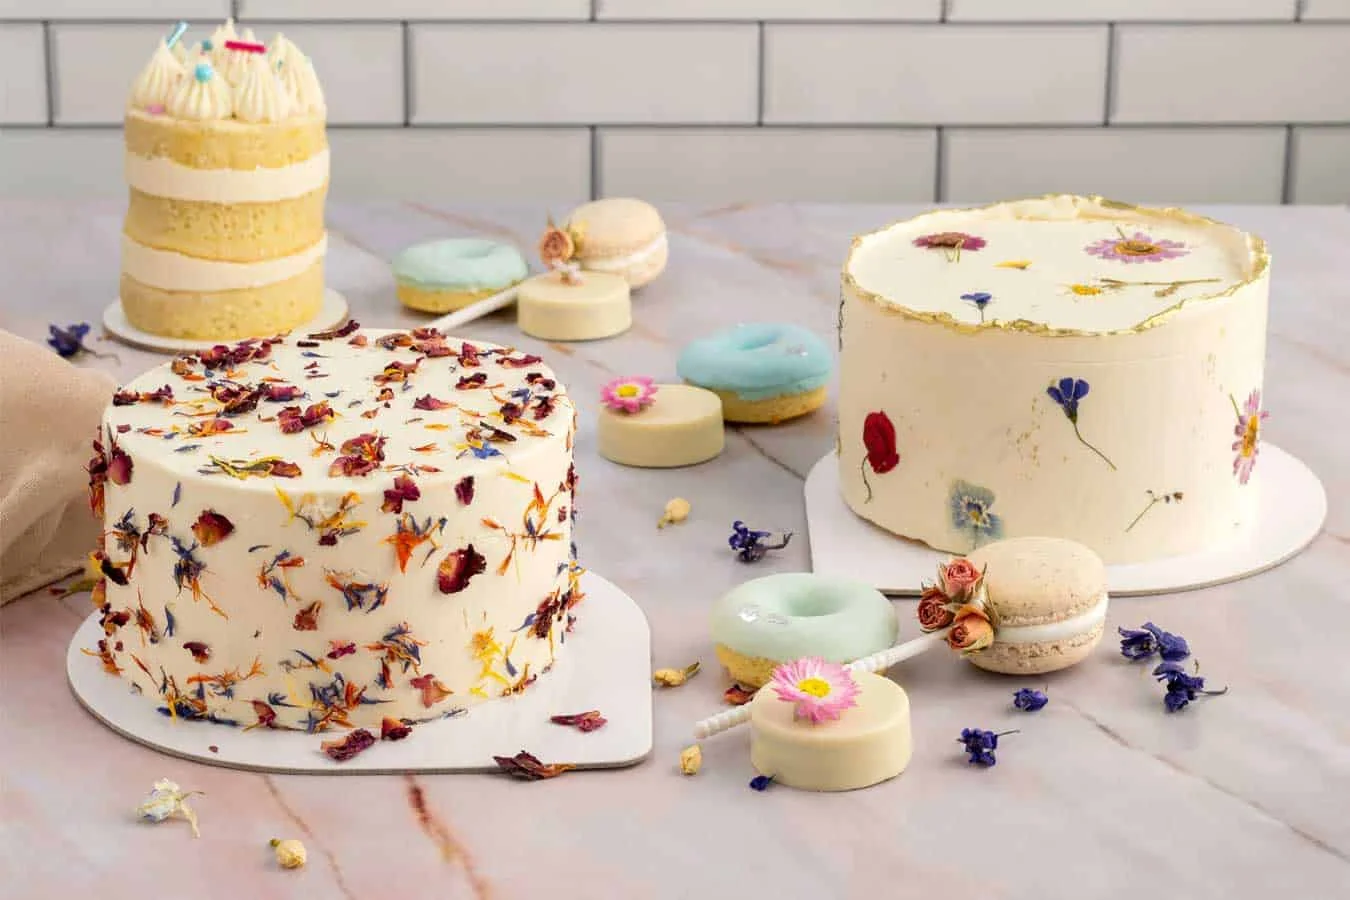 How to use edible flowers for a stunning designer cake